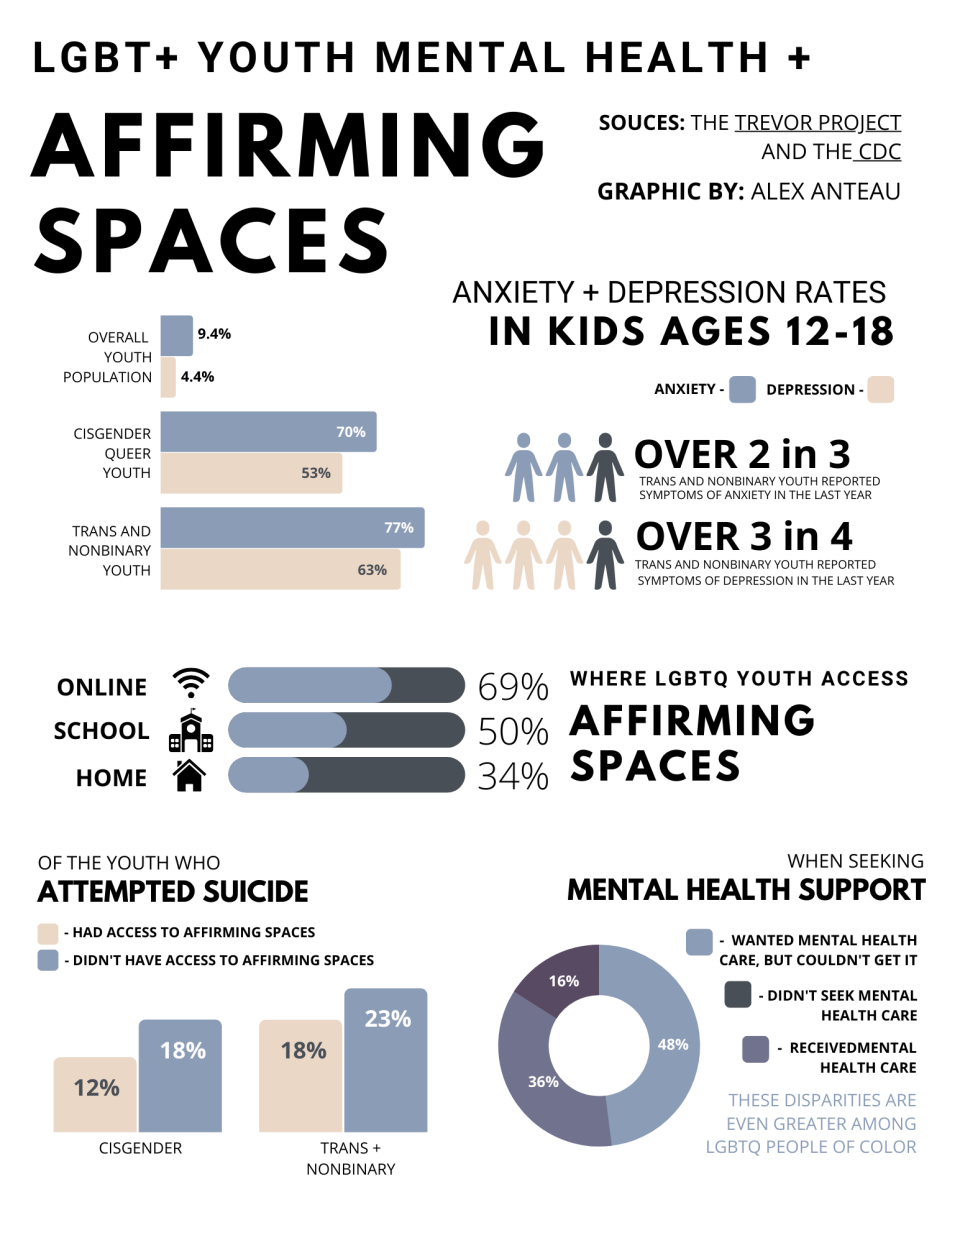 Mental health statistics concerning LGBTQ youth gathered from the Trevor Project and the Centers for Disease Control and Prevention.